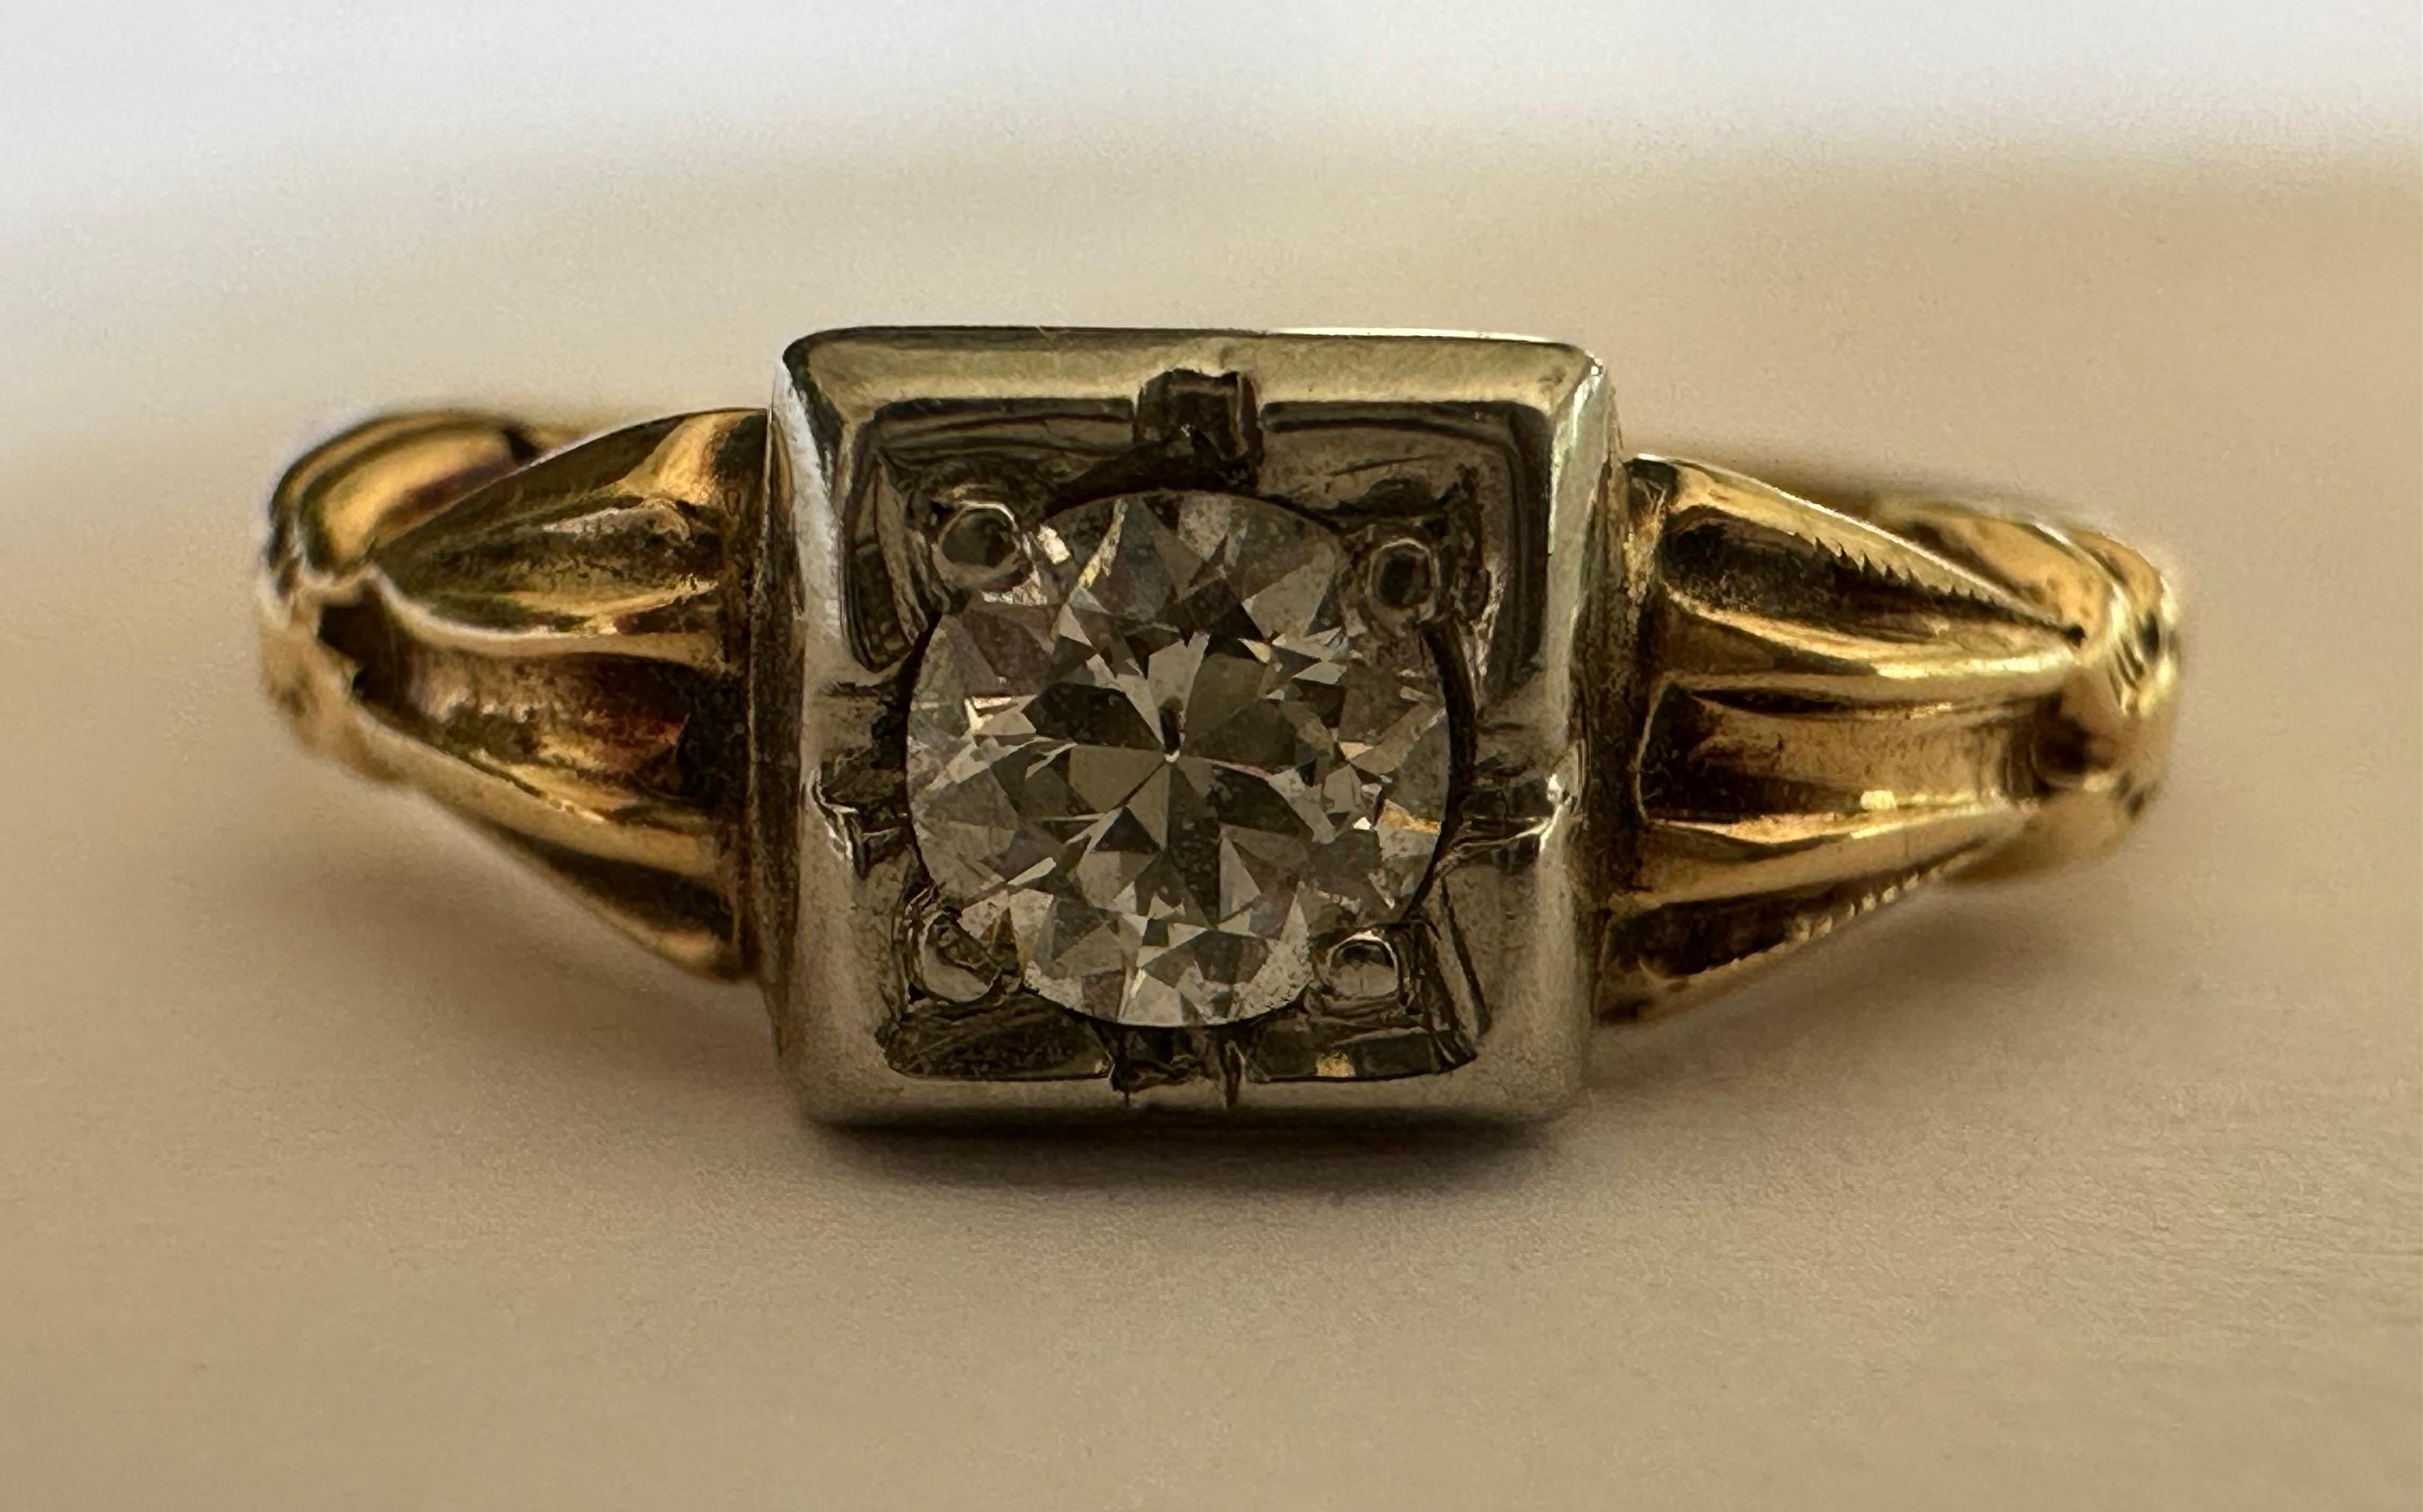 An Old European-cut diamond measuring approximately 0.20 carat, G color SI2 clarity, centers this mid-century solitaire band accented with hand engraved details. Set in two-tone 14-18K white and yellow gold. 